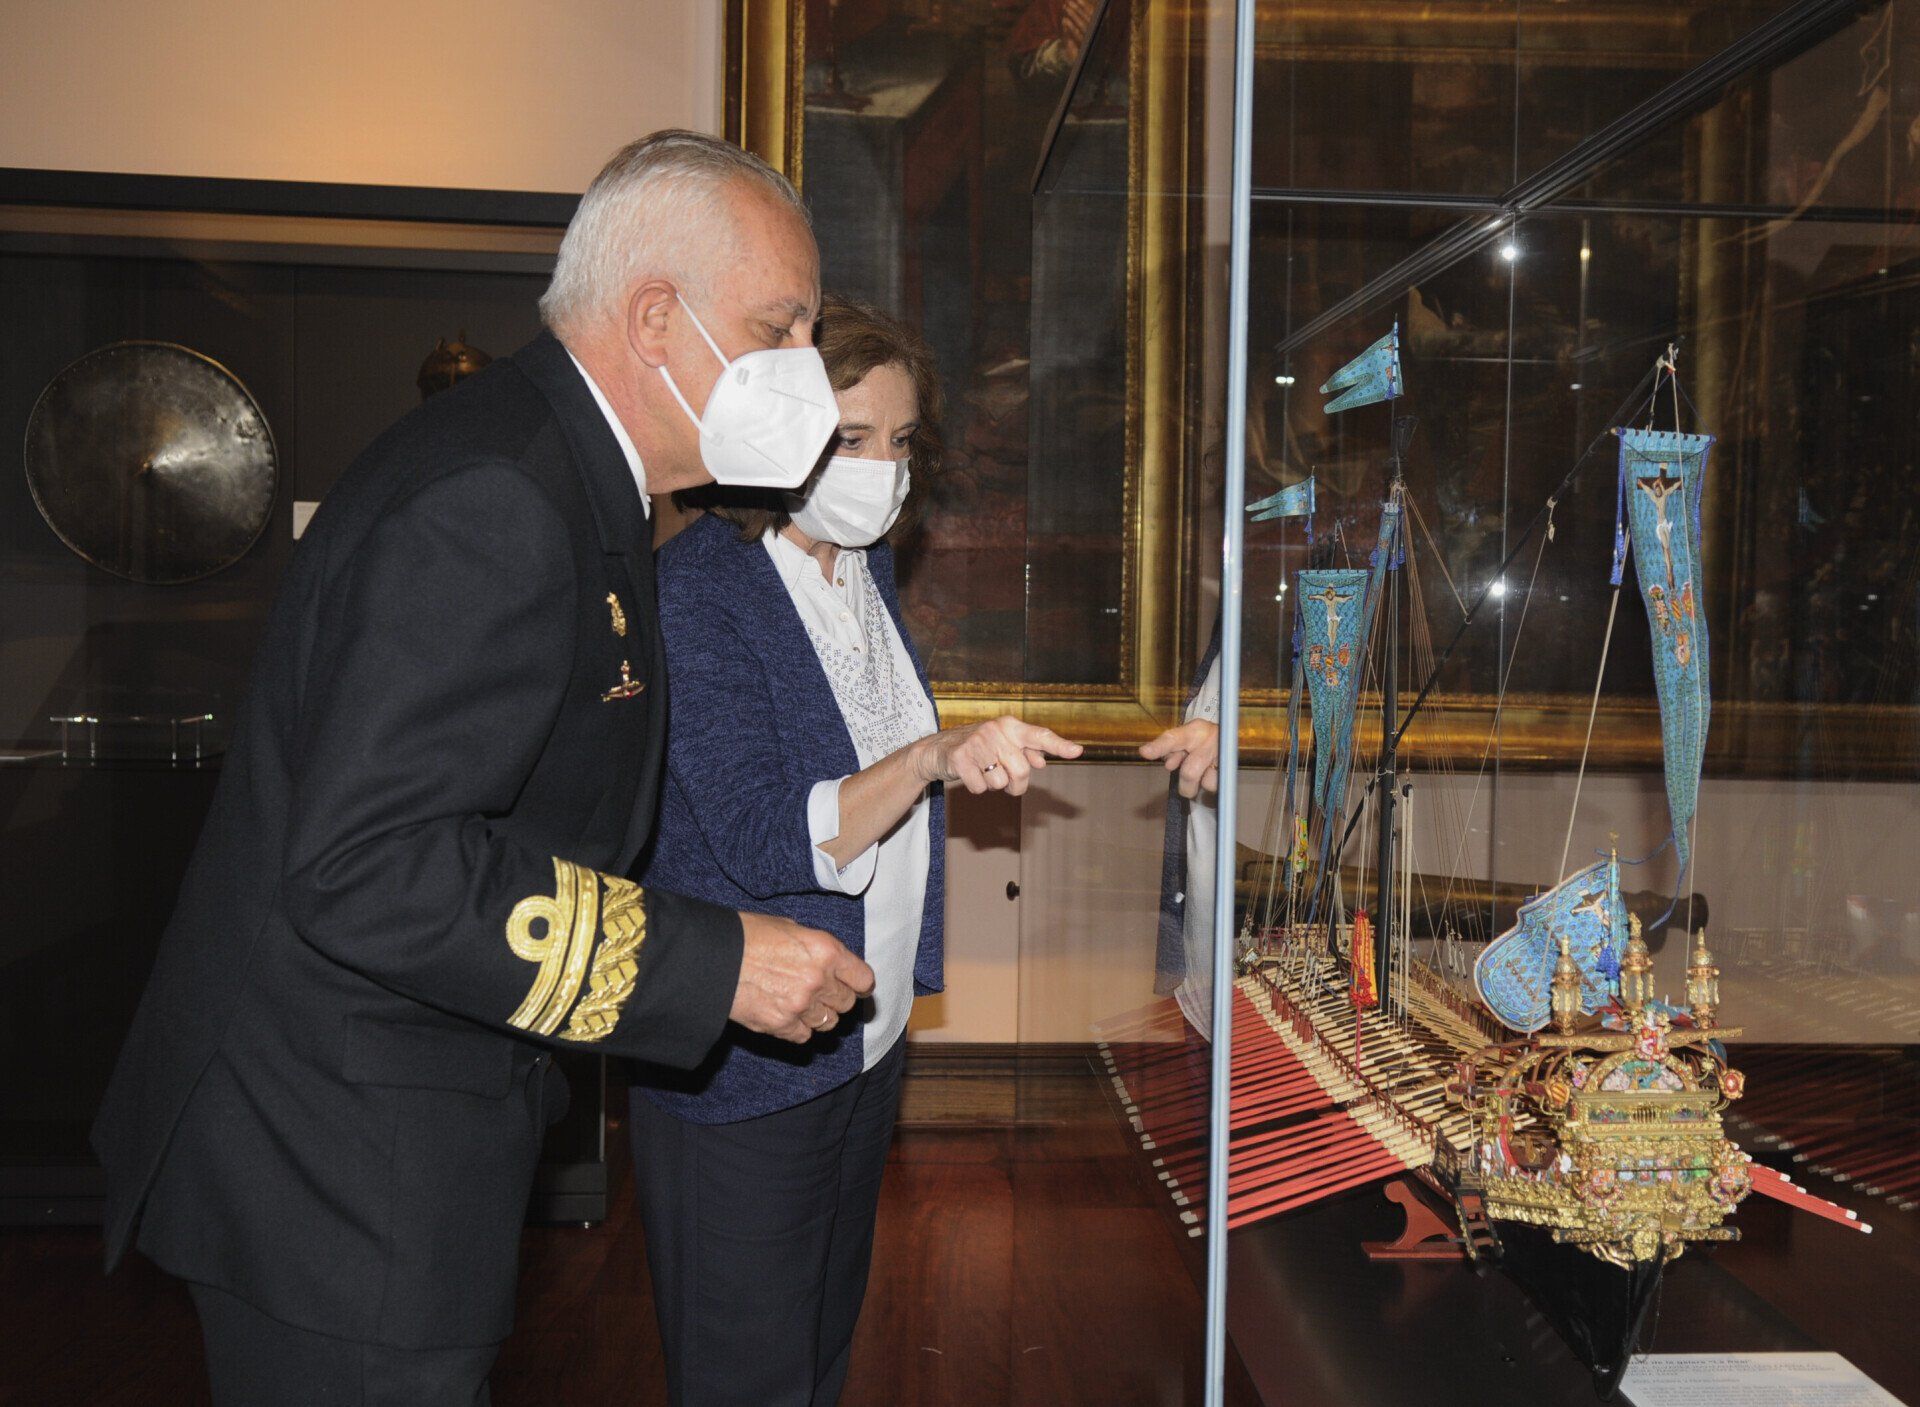 Director of the IHCN Mr. Marcial Gamboa Perez-Pardo and the Technical Director of the Naval Museum Carmen Lopez Calderon Photo: Courtesy of the Naval Museum in Madrid